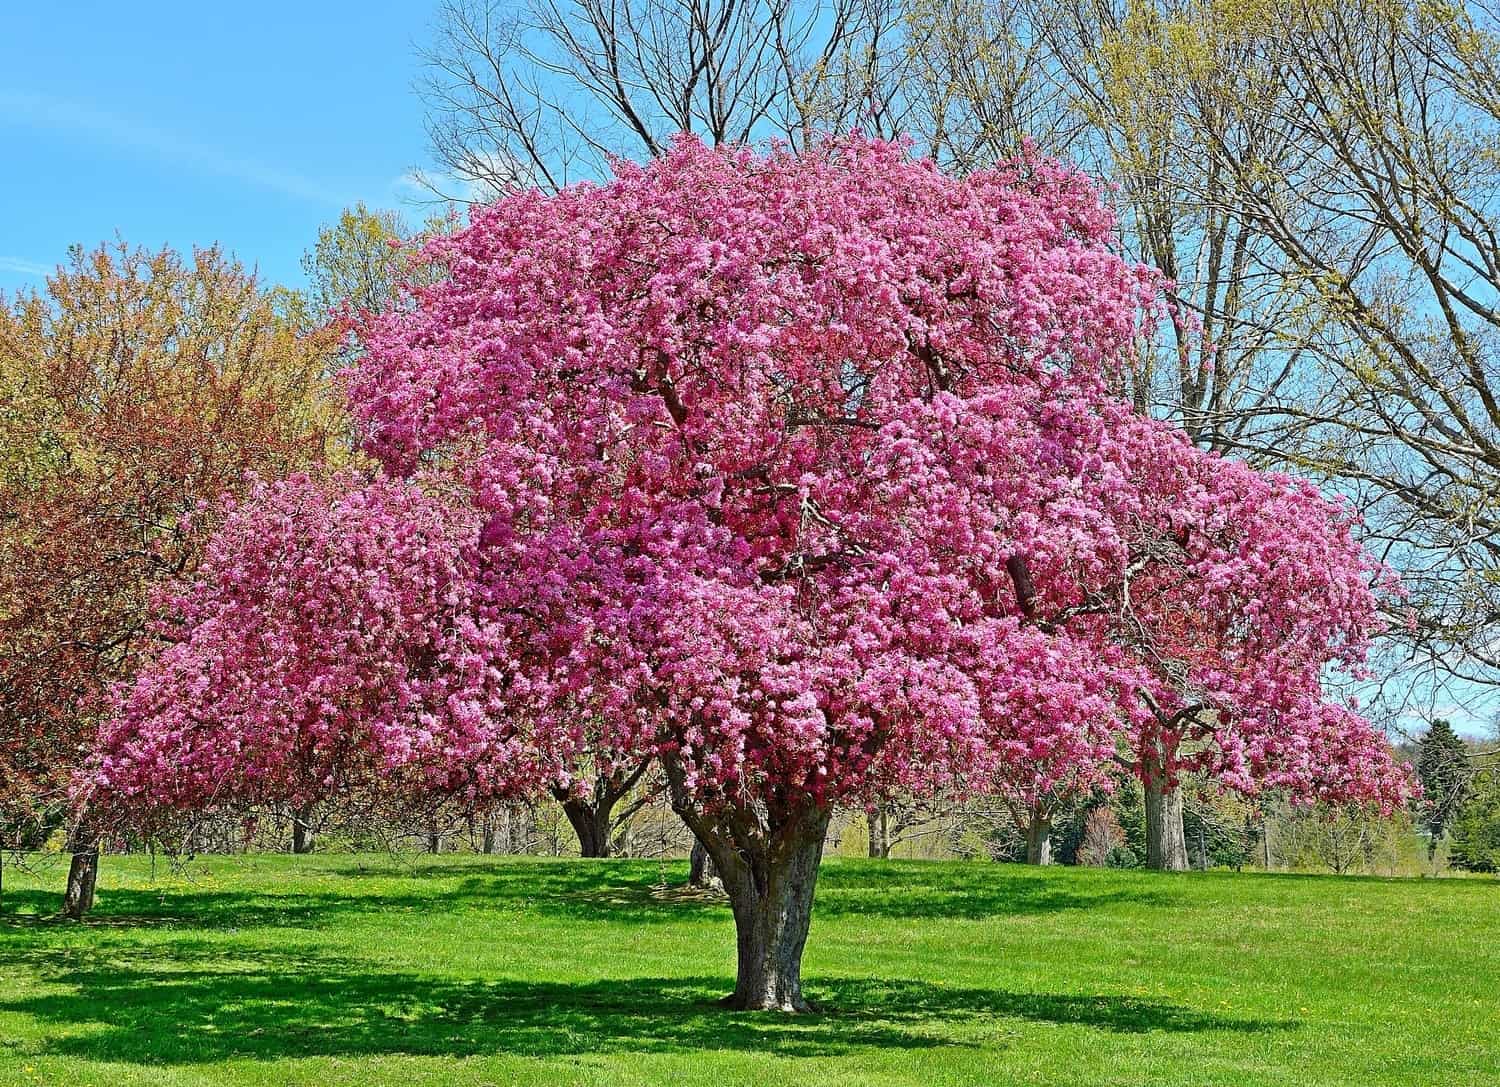 A mature crabapple tree in full bloom. 